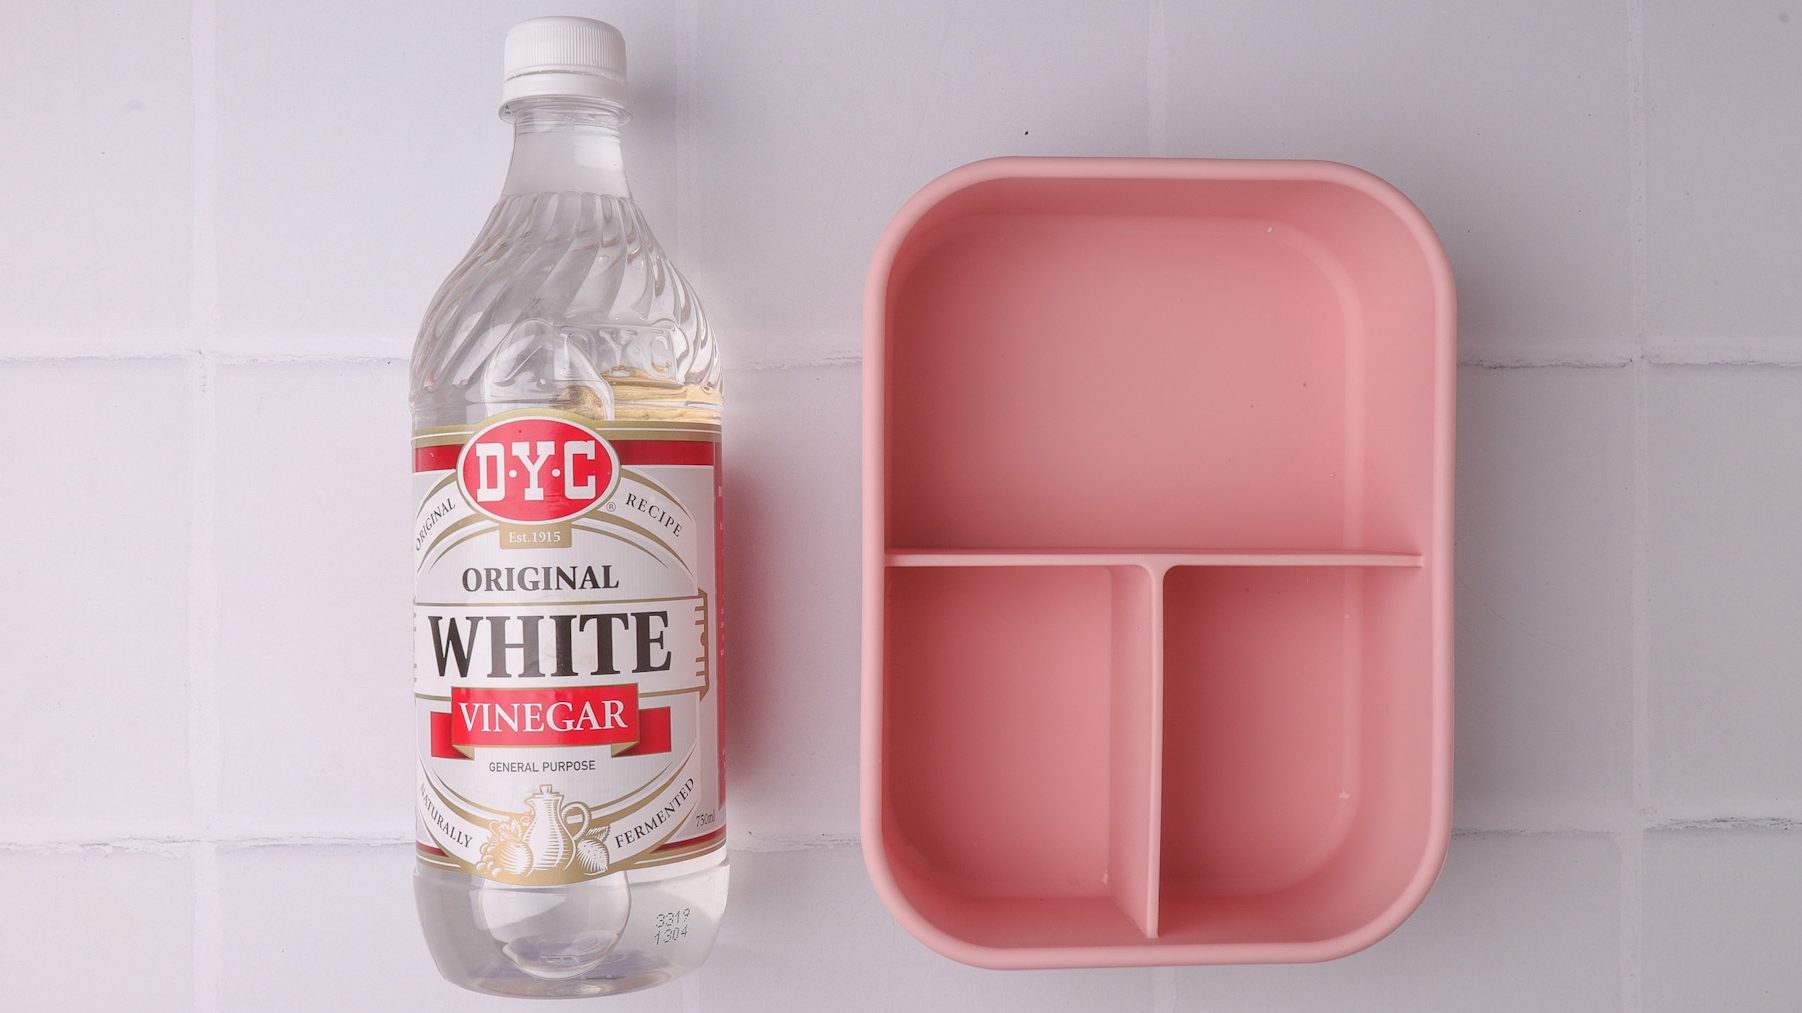 A bottle of vinegar and an empty pink lunch box.